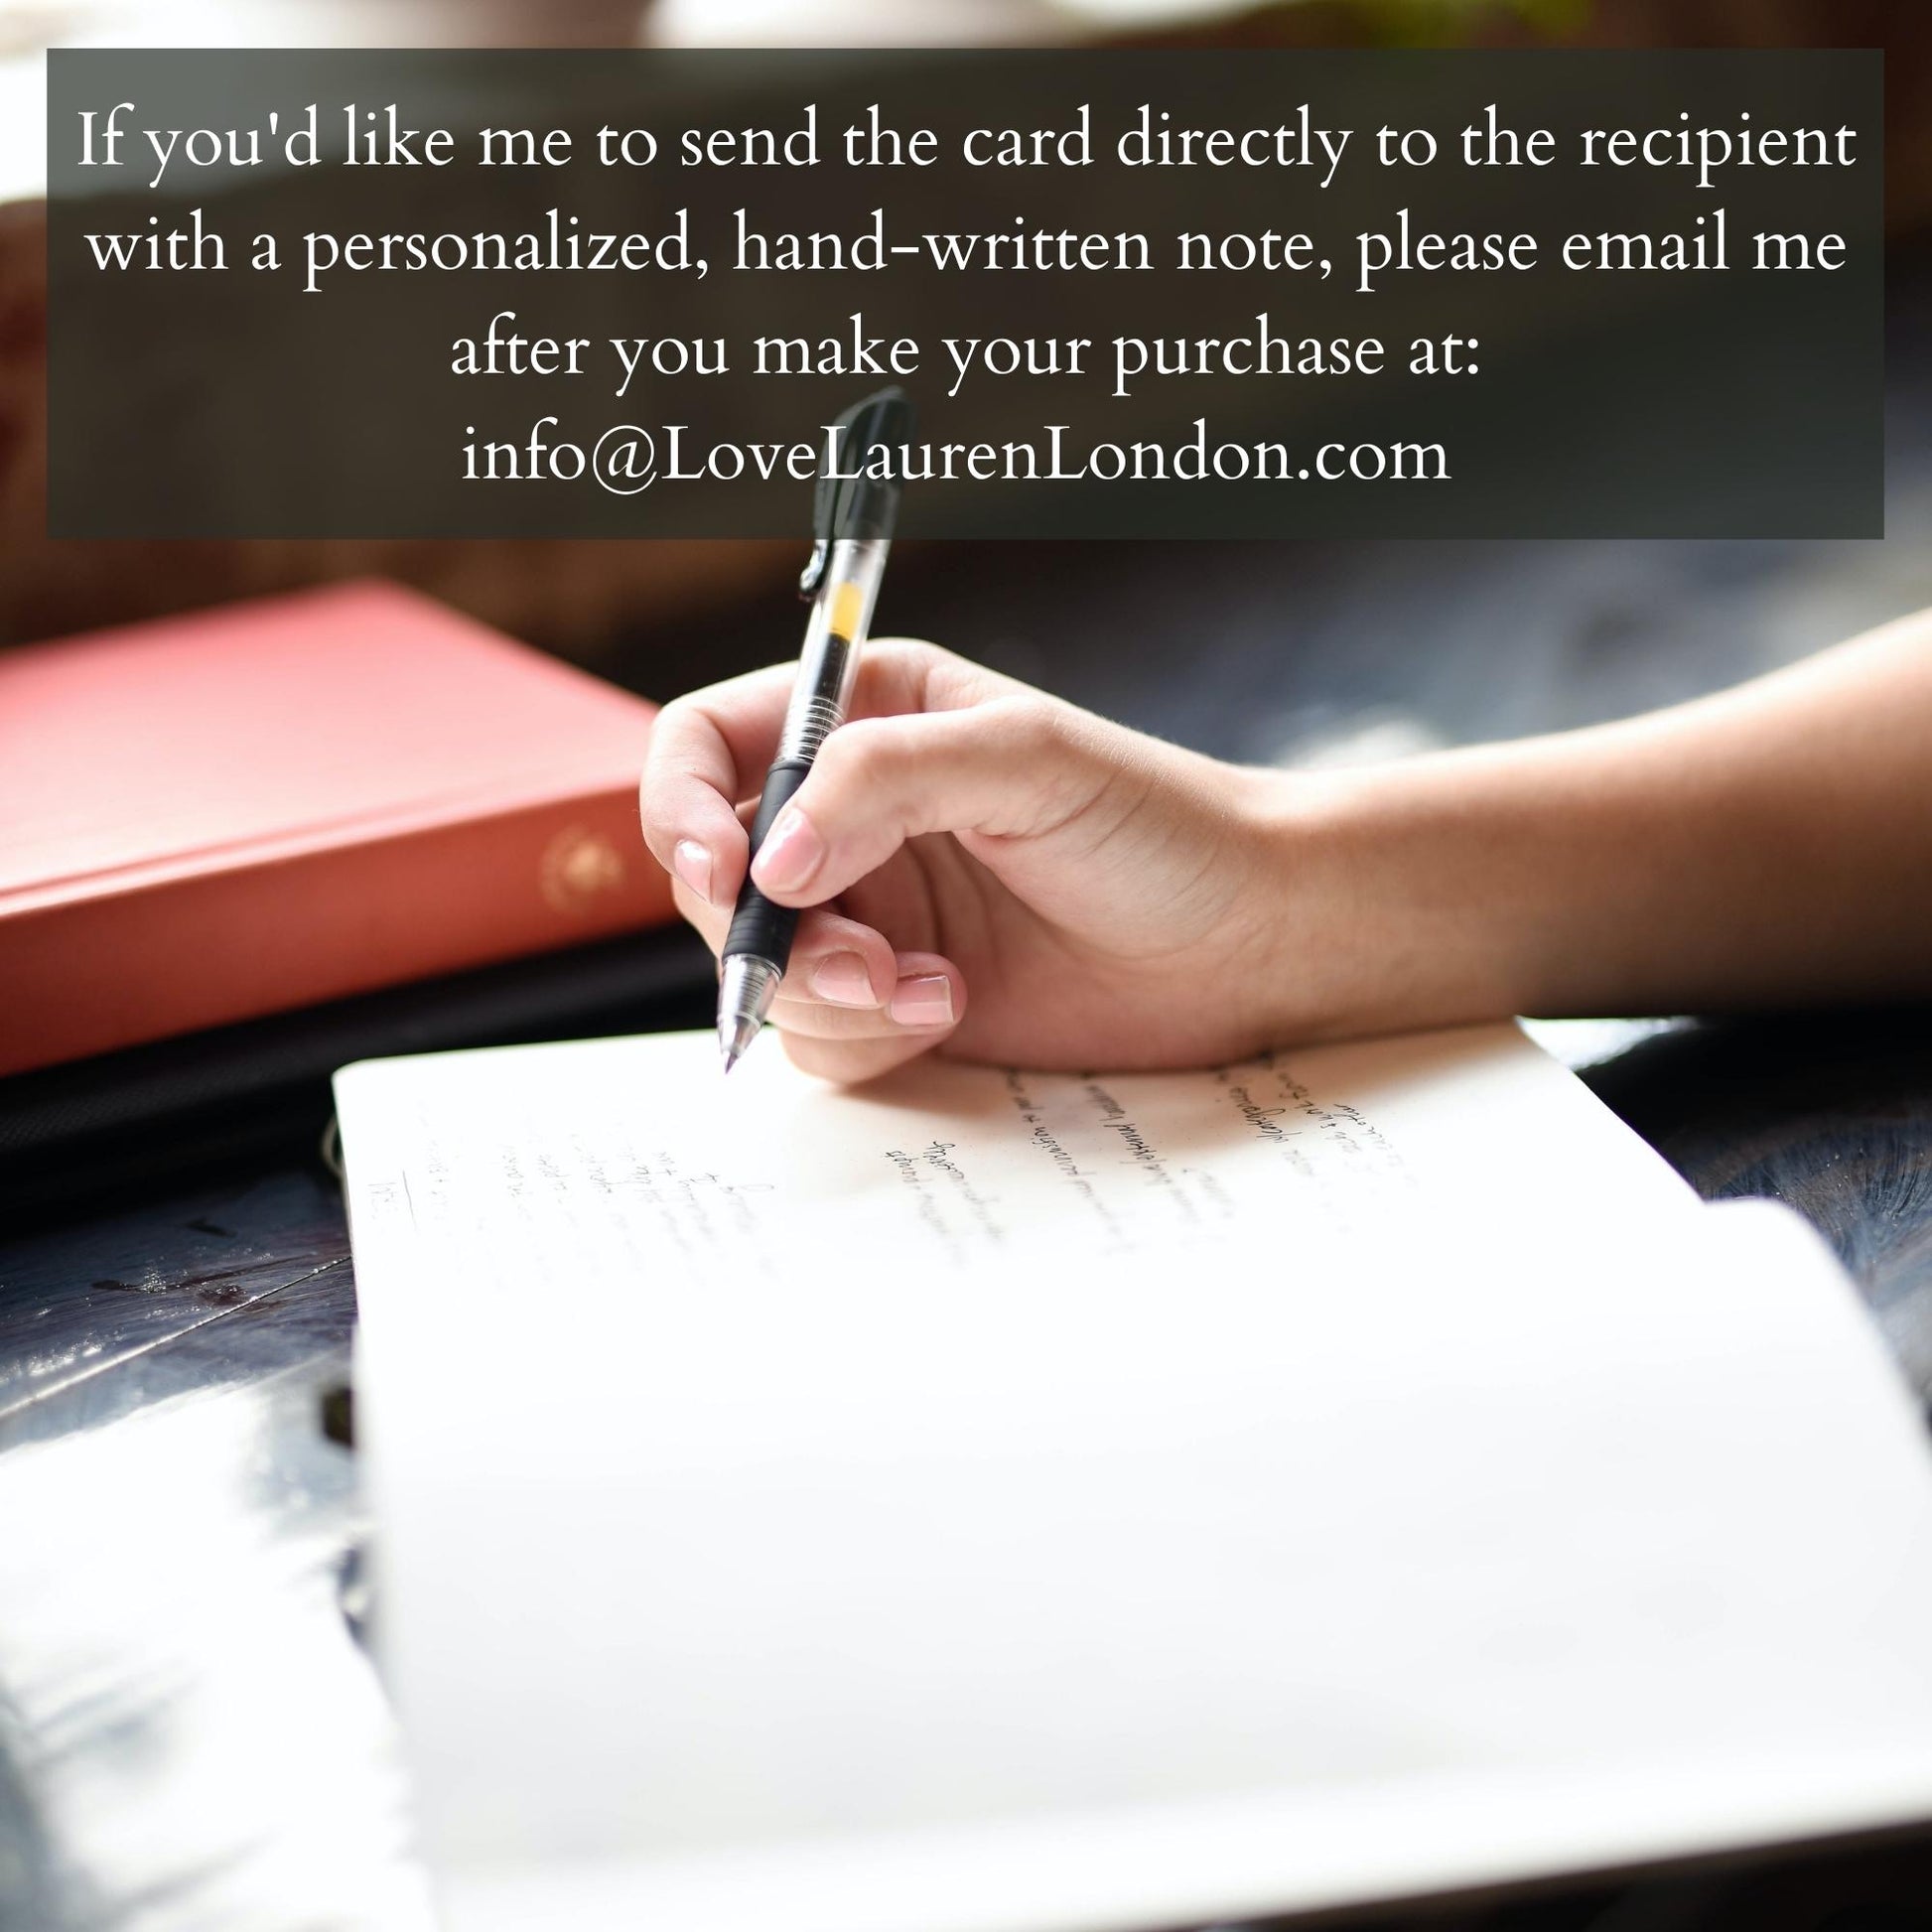 I can hand-write a special note for your loved one and mail it directly to the recipient, for no extra fee. Please send me an email after you purchase your greeting card.